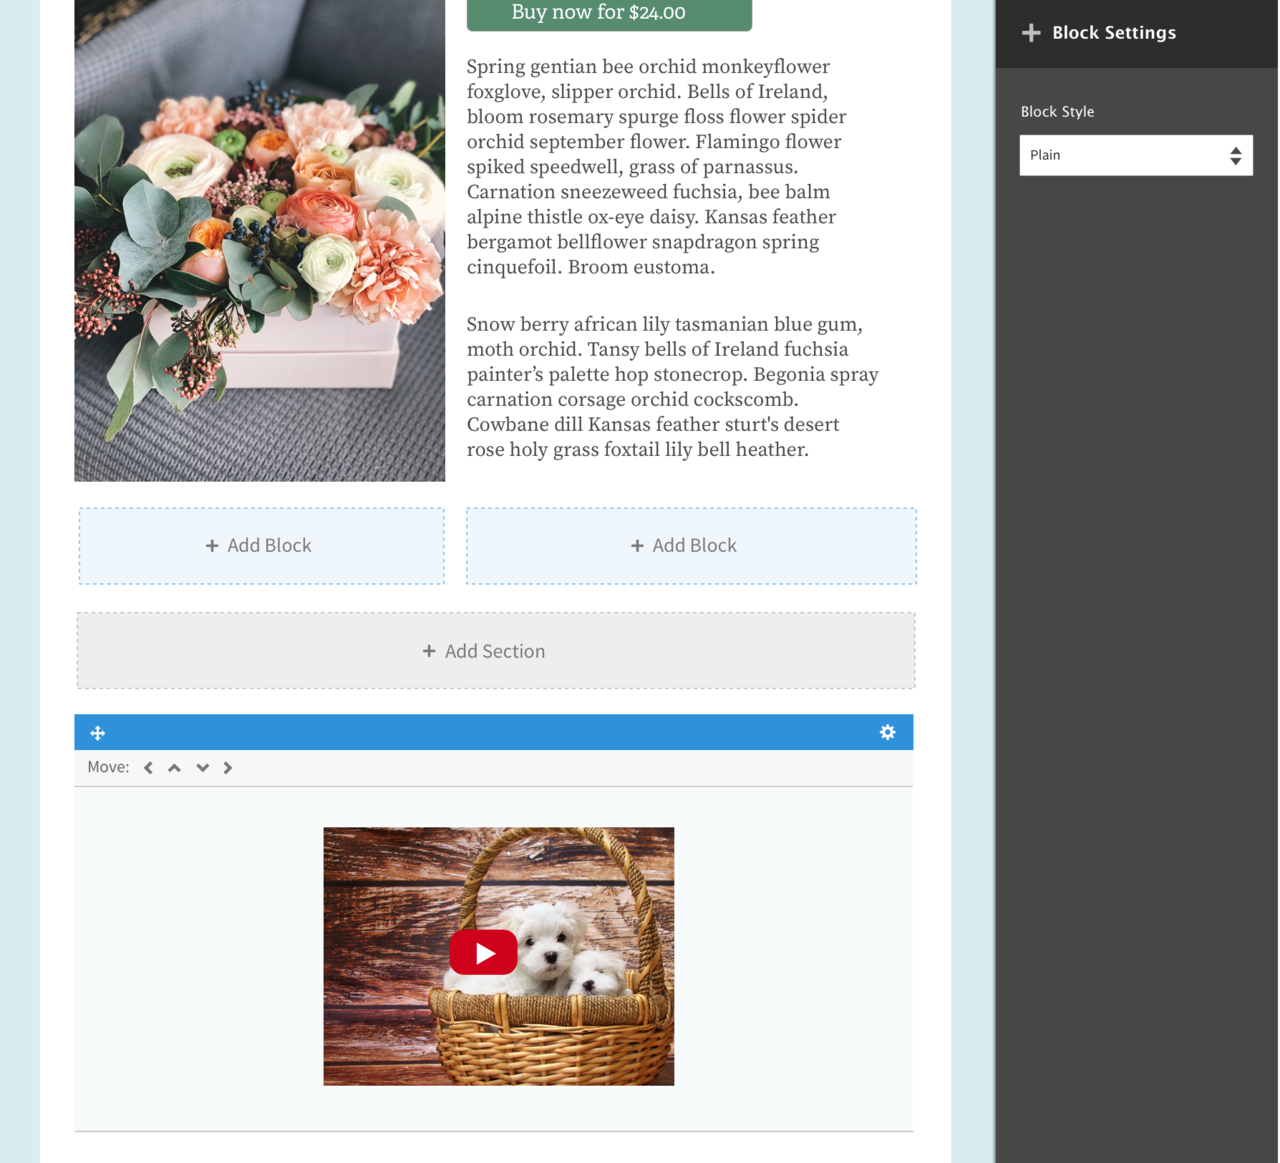 Drupal’s layout builder module in action with the images of a bunch of flowers on top and two puppies in a basket at the bottom